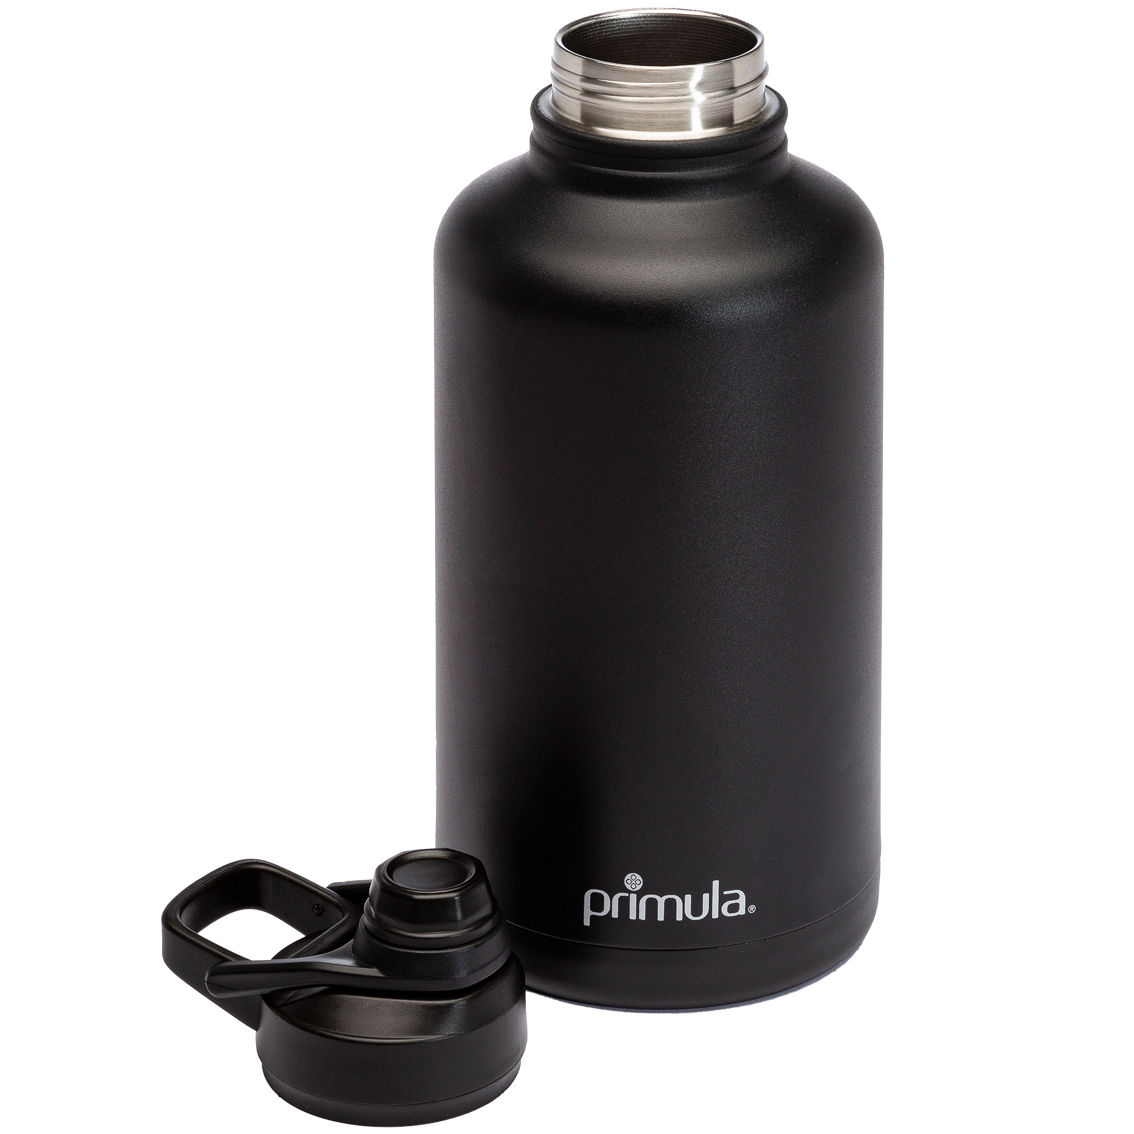 Primula Traveler Double Wall Vacuum Insulated Stainless Steel 64 oz. Bottle - Image 3 of 5